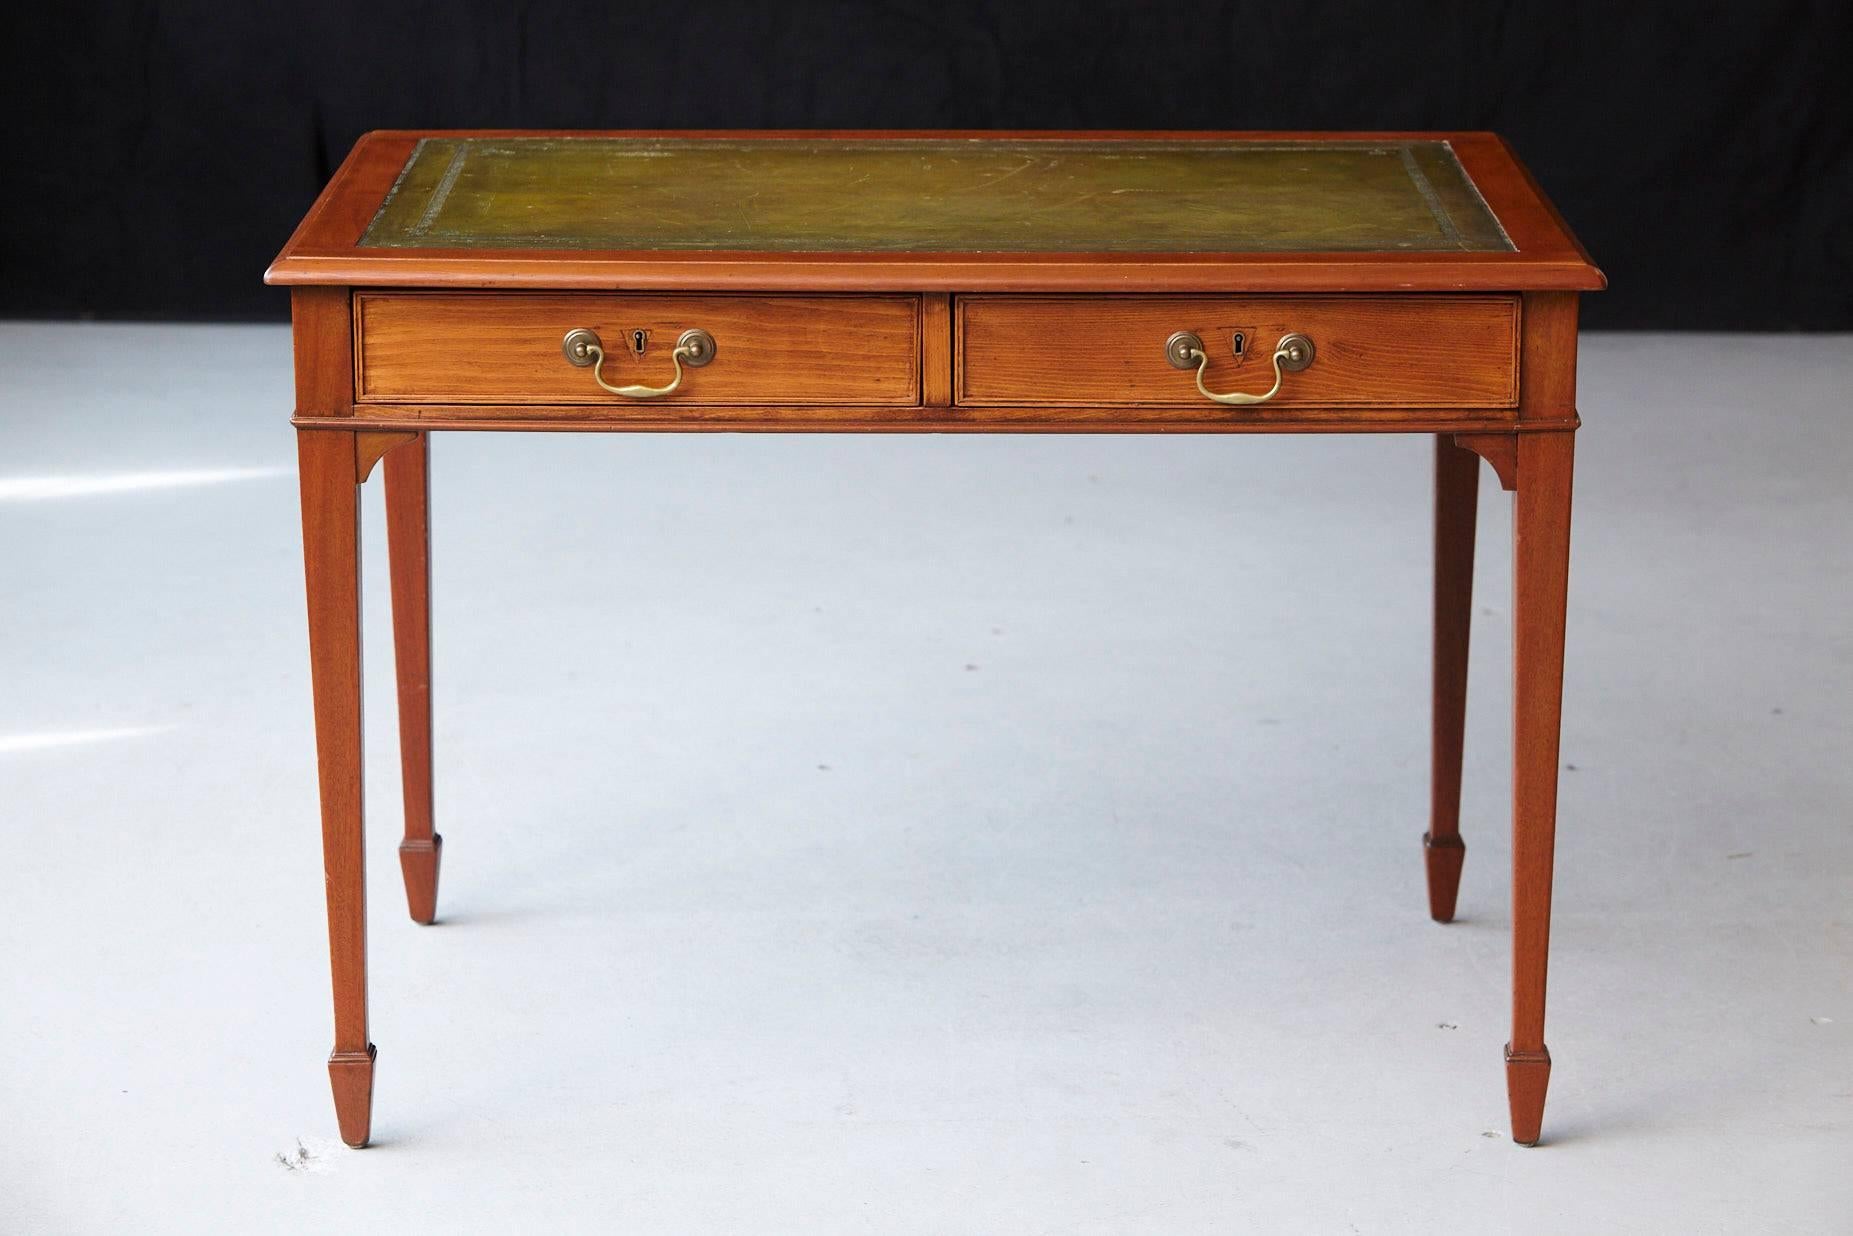 Petite French walnut desk with a light finish. Olive green leather top with gold tooling, two drawers with brass handles, raised on tapered legs with spade feet.
Some scratches to the leather surface, please refer to the detailed photos.